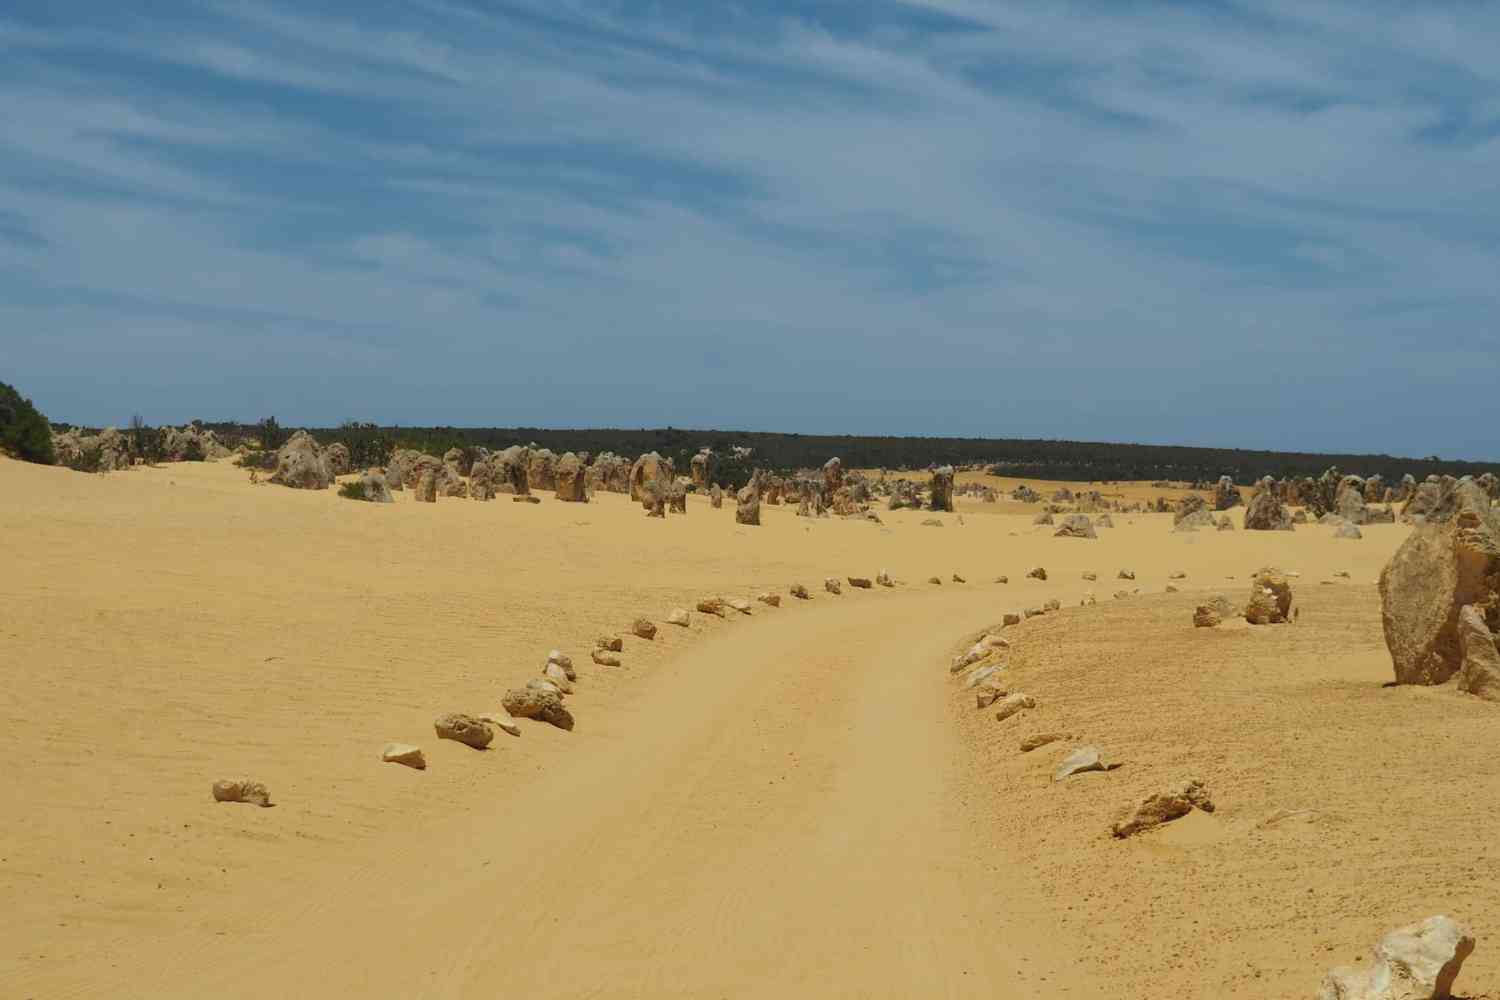 Driving around the Pinnacles Desert. This image shows the road